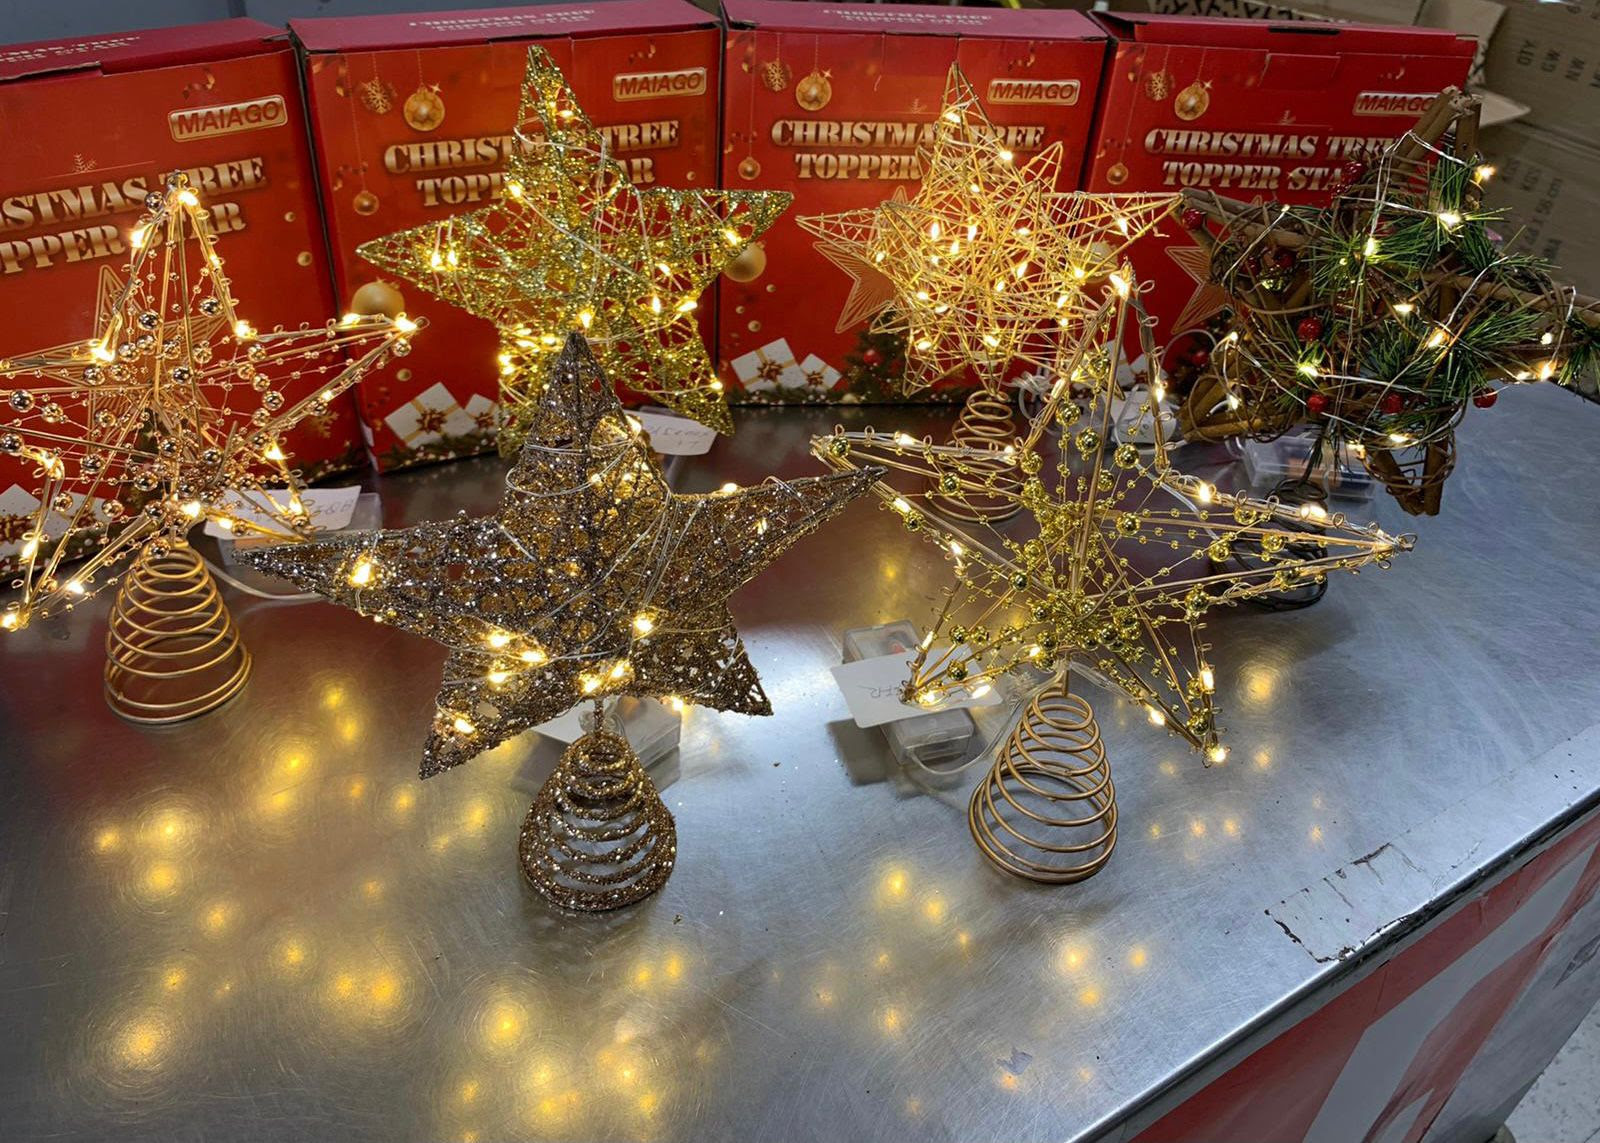 MAIAGO 10 Inch Christmas Star Tree Topper with 20 LED Warm White Lights. 3500units. EXW Los Angeles $3.25/unit.